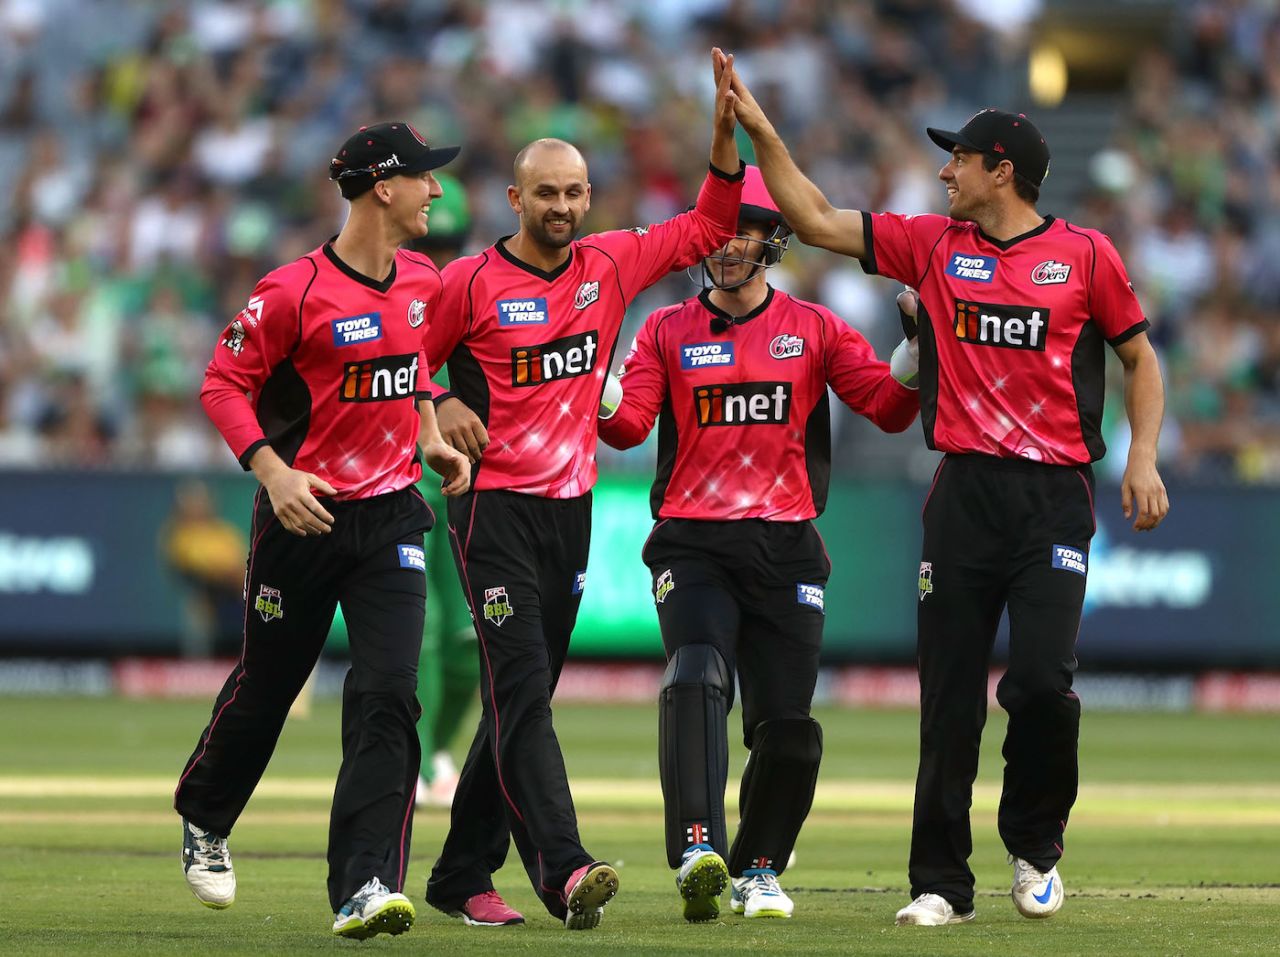 Nathan Lyon bowled an economical spell for three wickets, Melbourne Stars v Sydney Sixers, BBL 2017-18, Melbourne, January 16, 2018